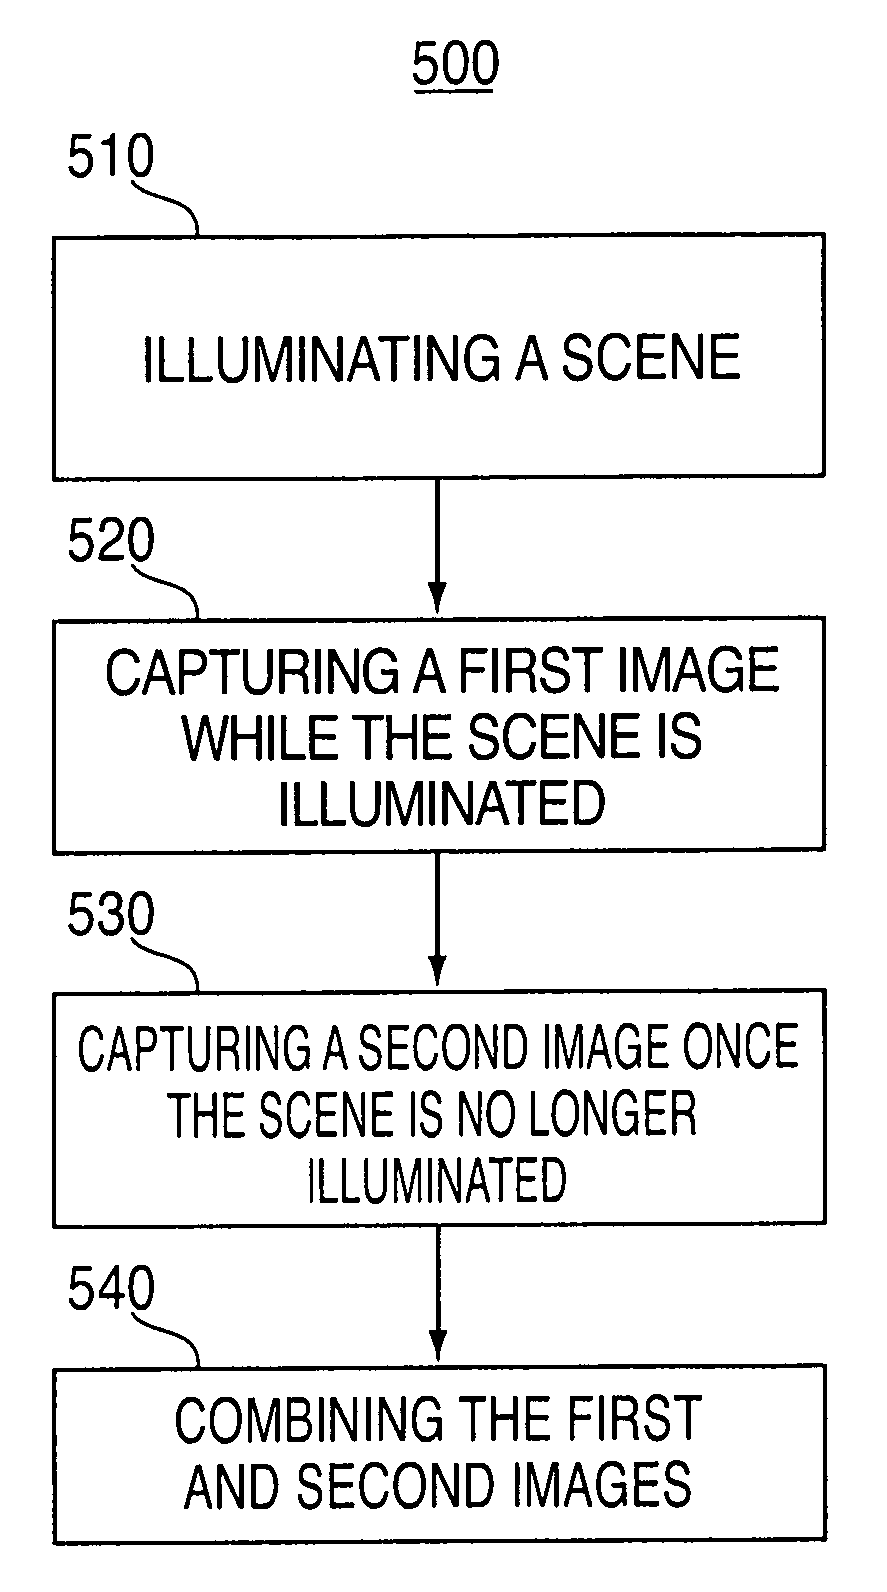 Illumination systems and methods for computer imagers